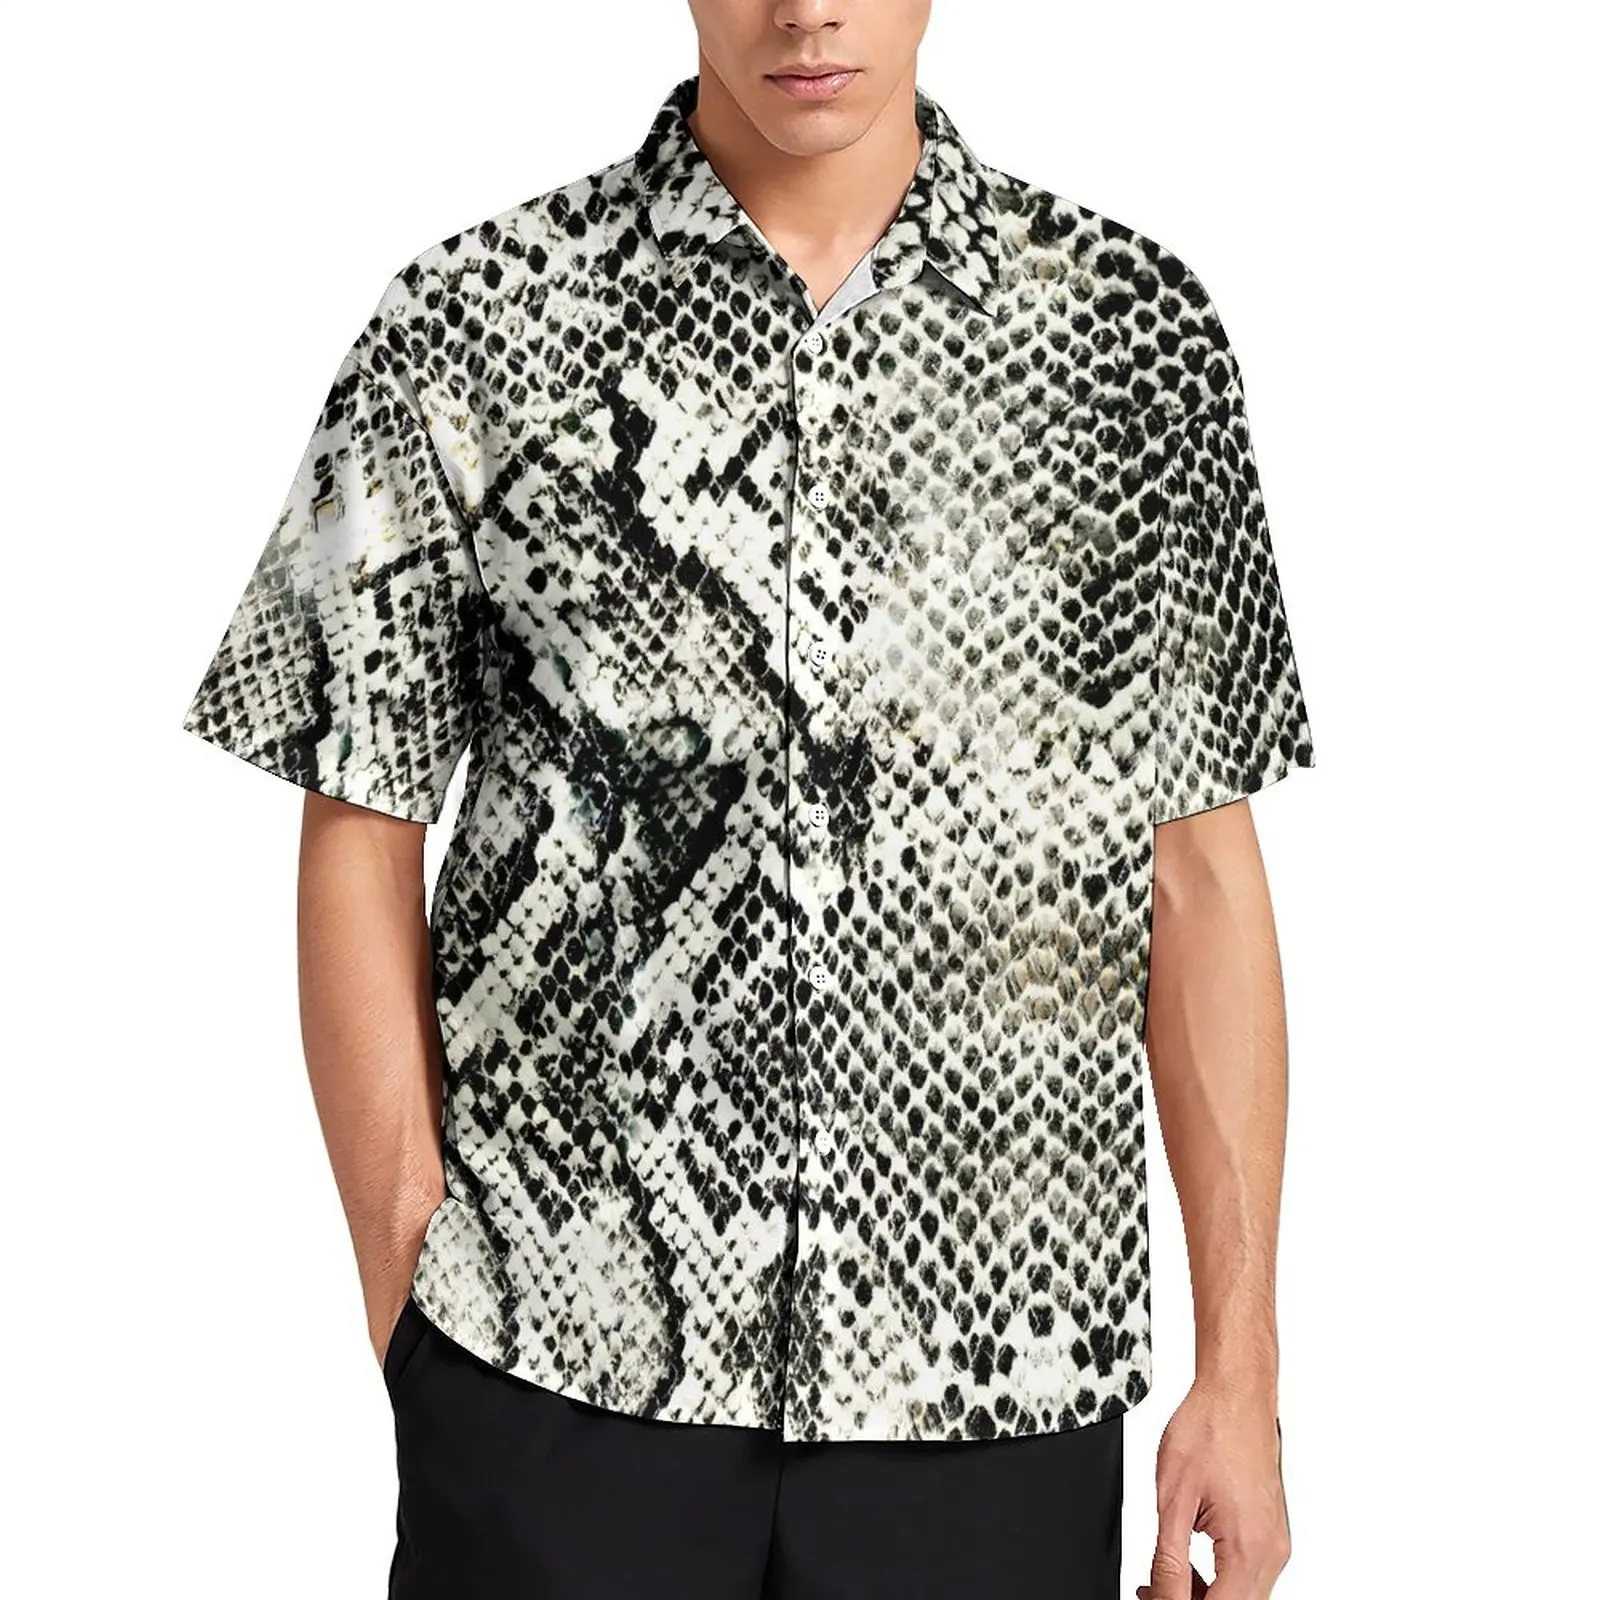 

White Snakeskin Loose Shirt Male Vacation Animal Print Casual Shirts Hawaiian Graphic Short Sleeve Cool Oversized Blouses